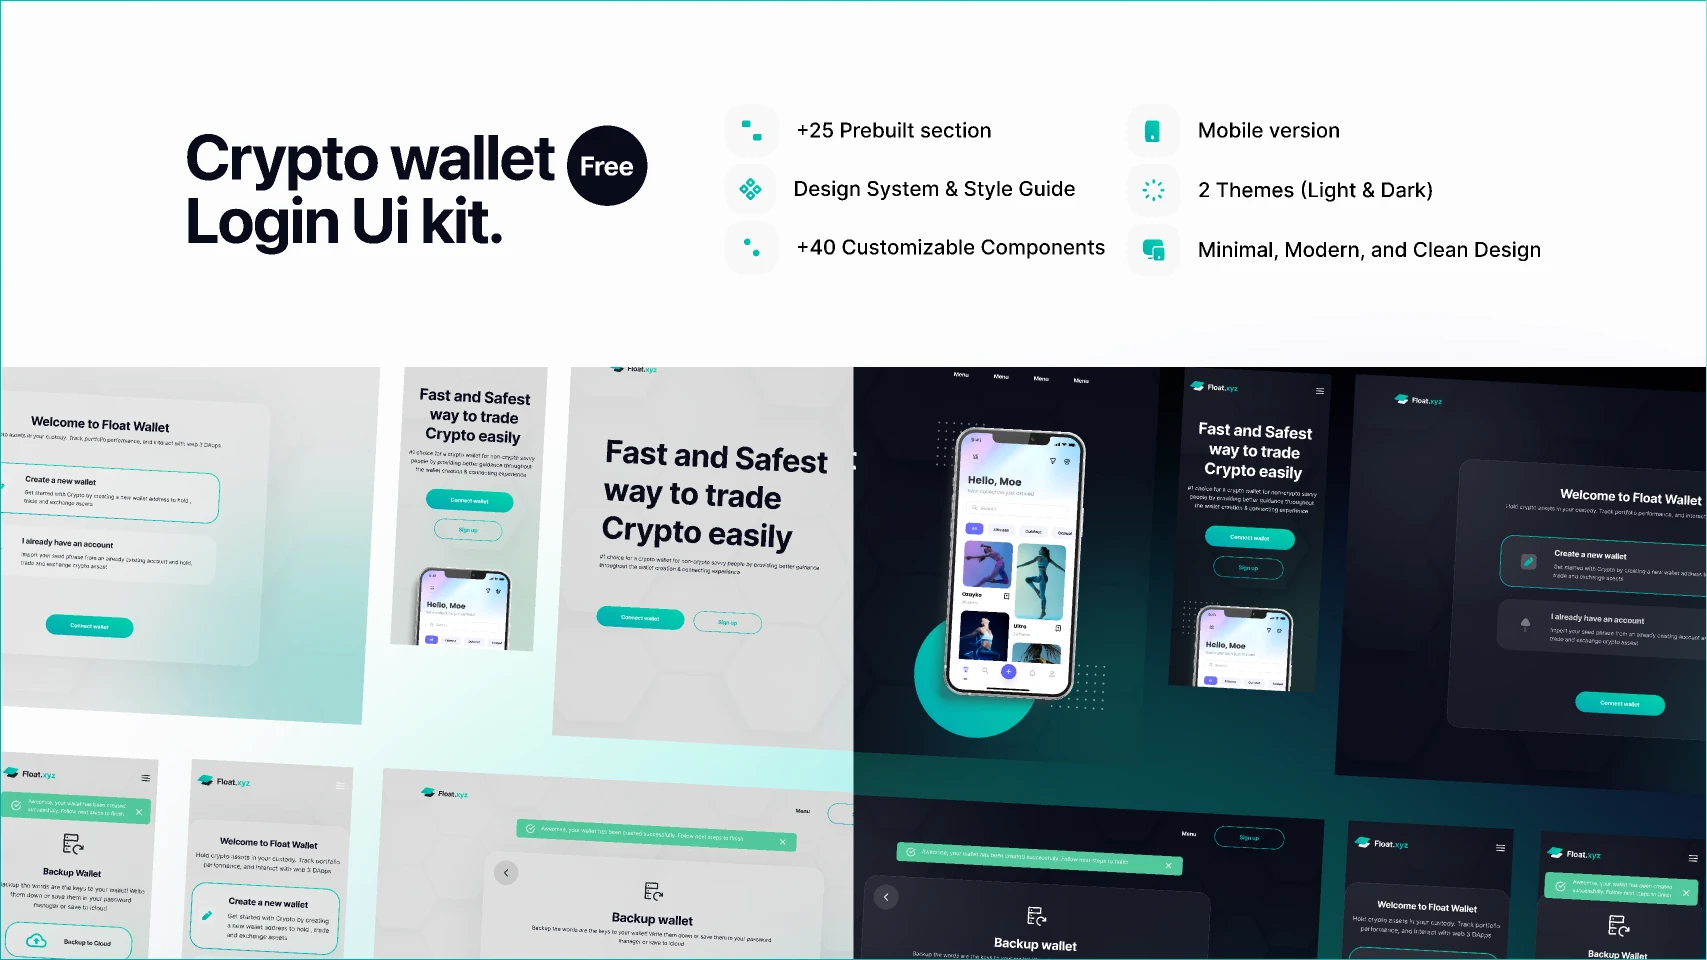 Crypto wallet Login Ui kit (free) 0.1 for Figma and Adobe XD